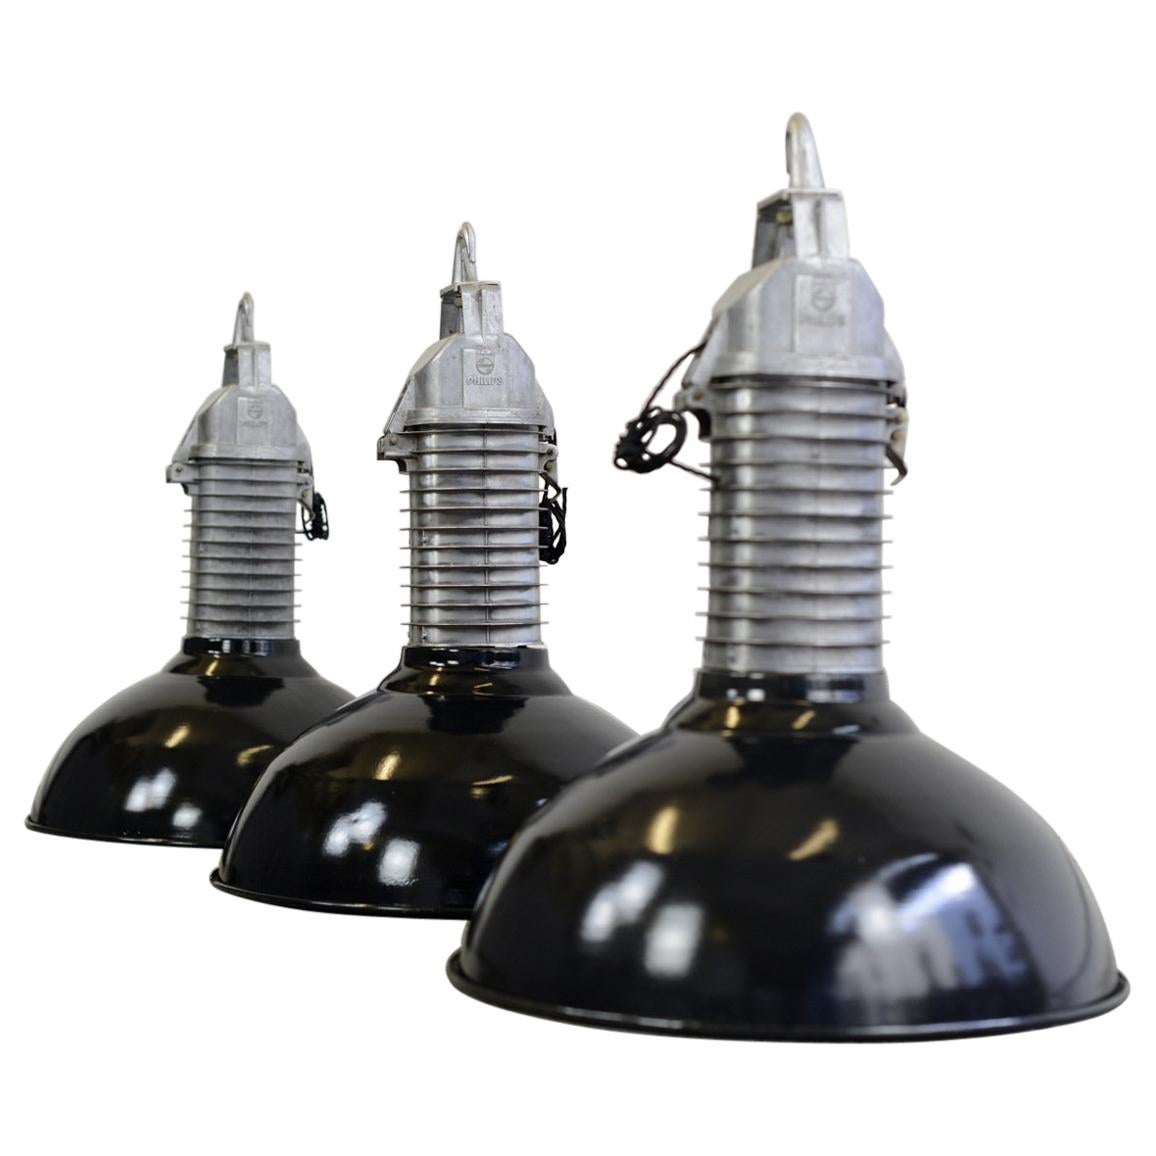 Large Dutch Industrial Lights by Phillips, circa 1950s